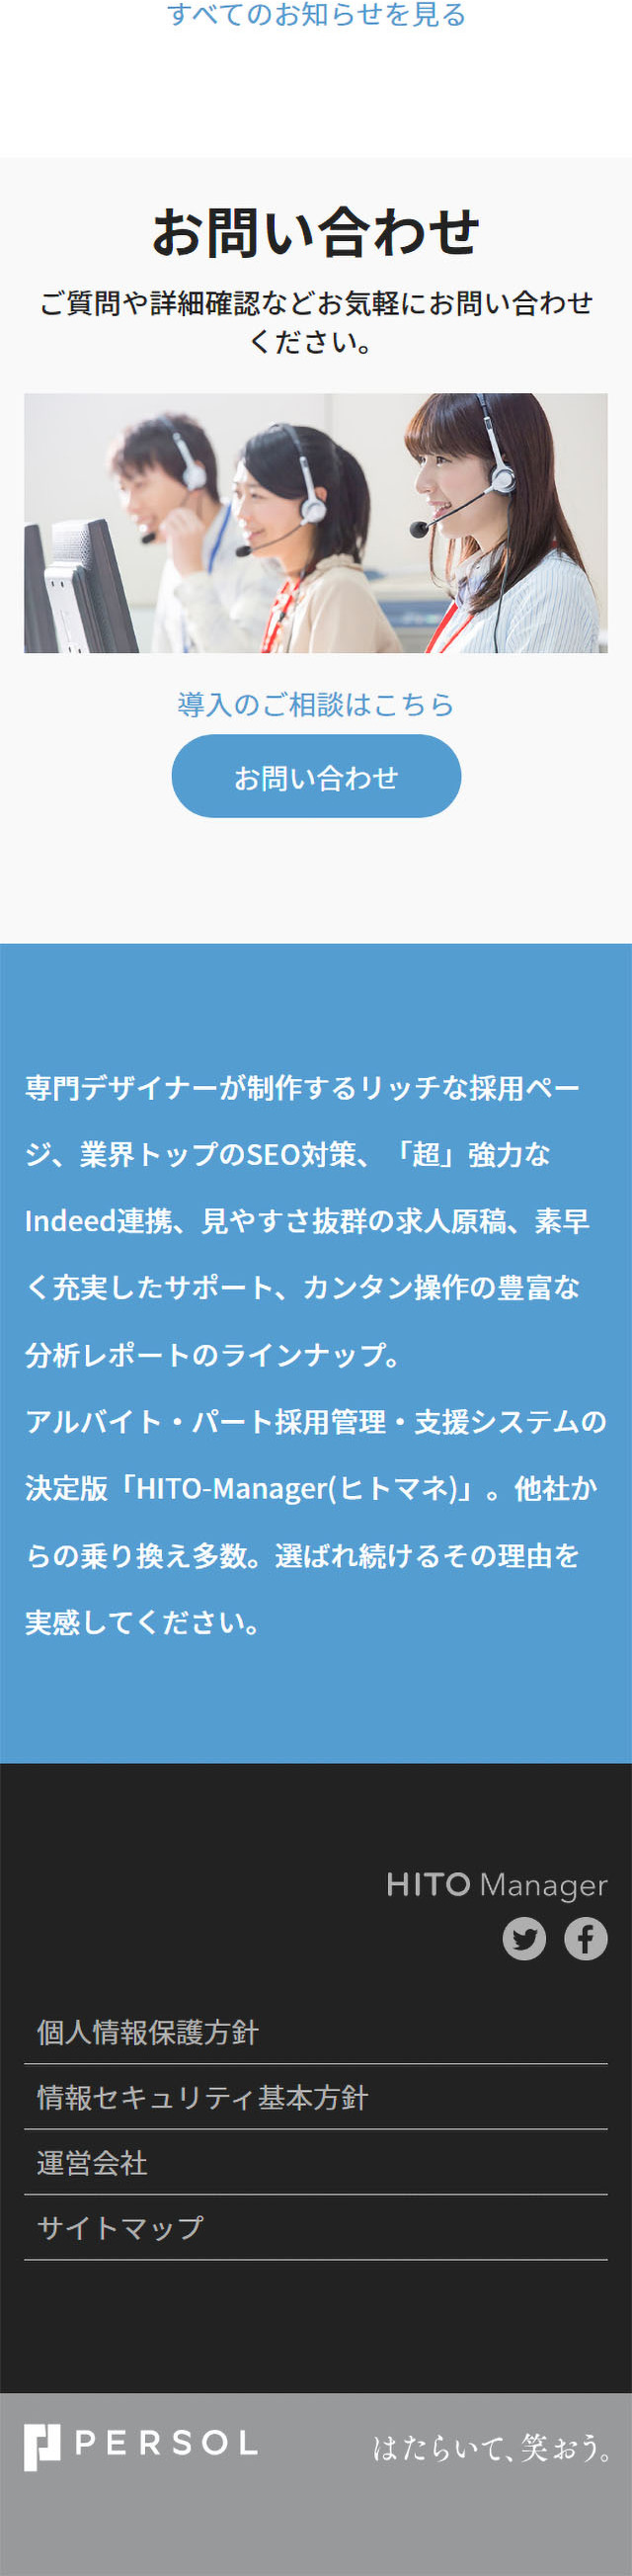 HITO-Manager_sp_2